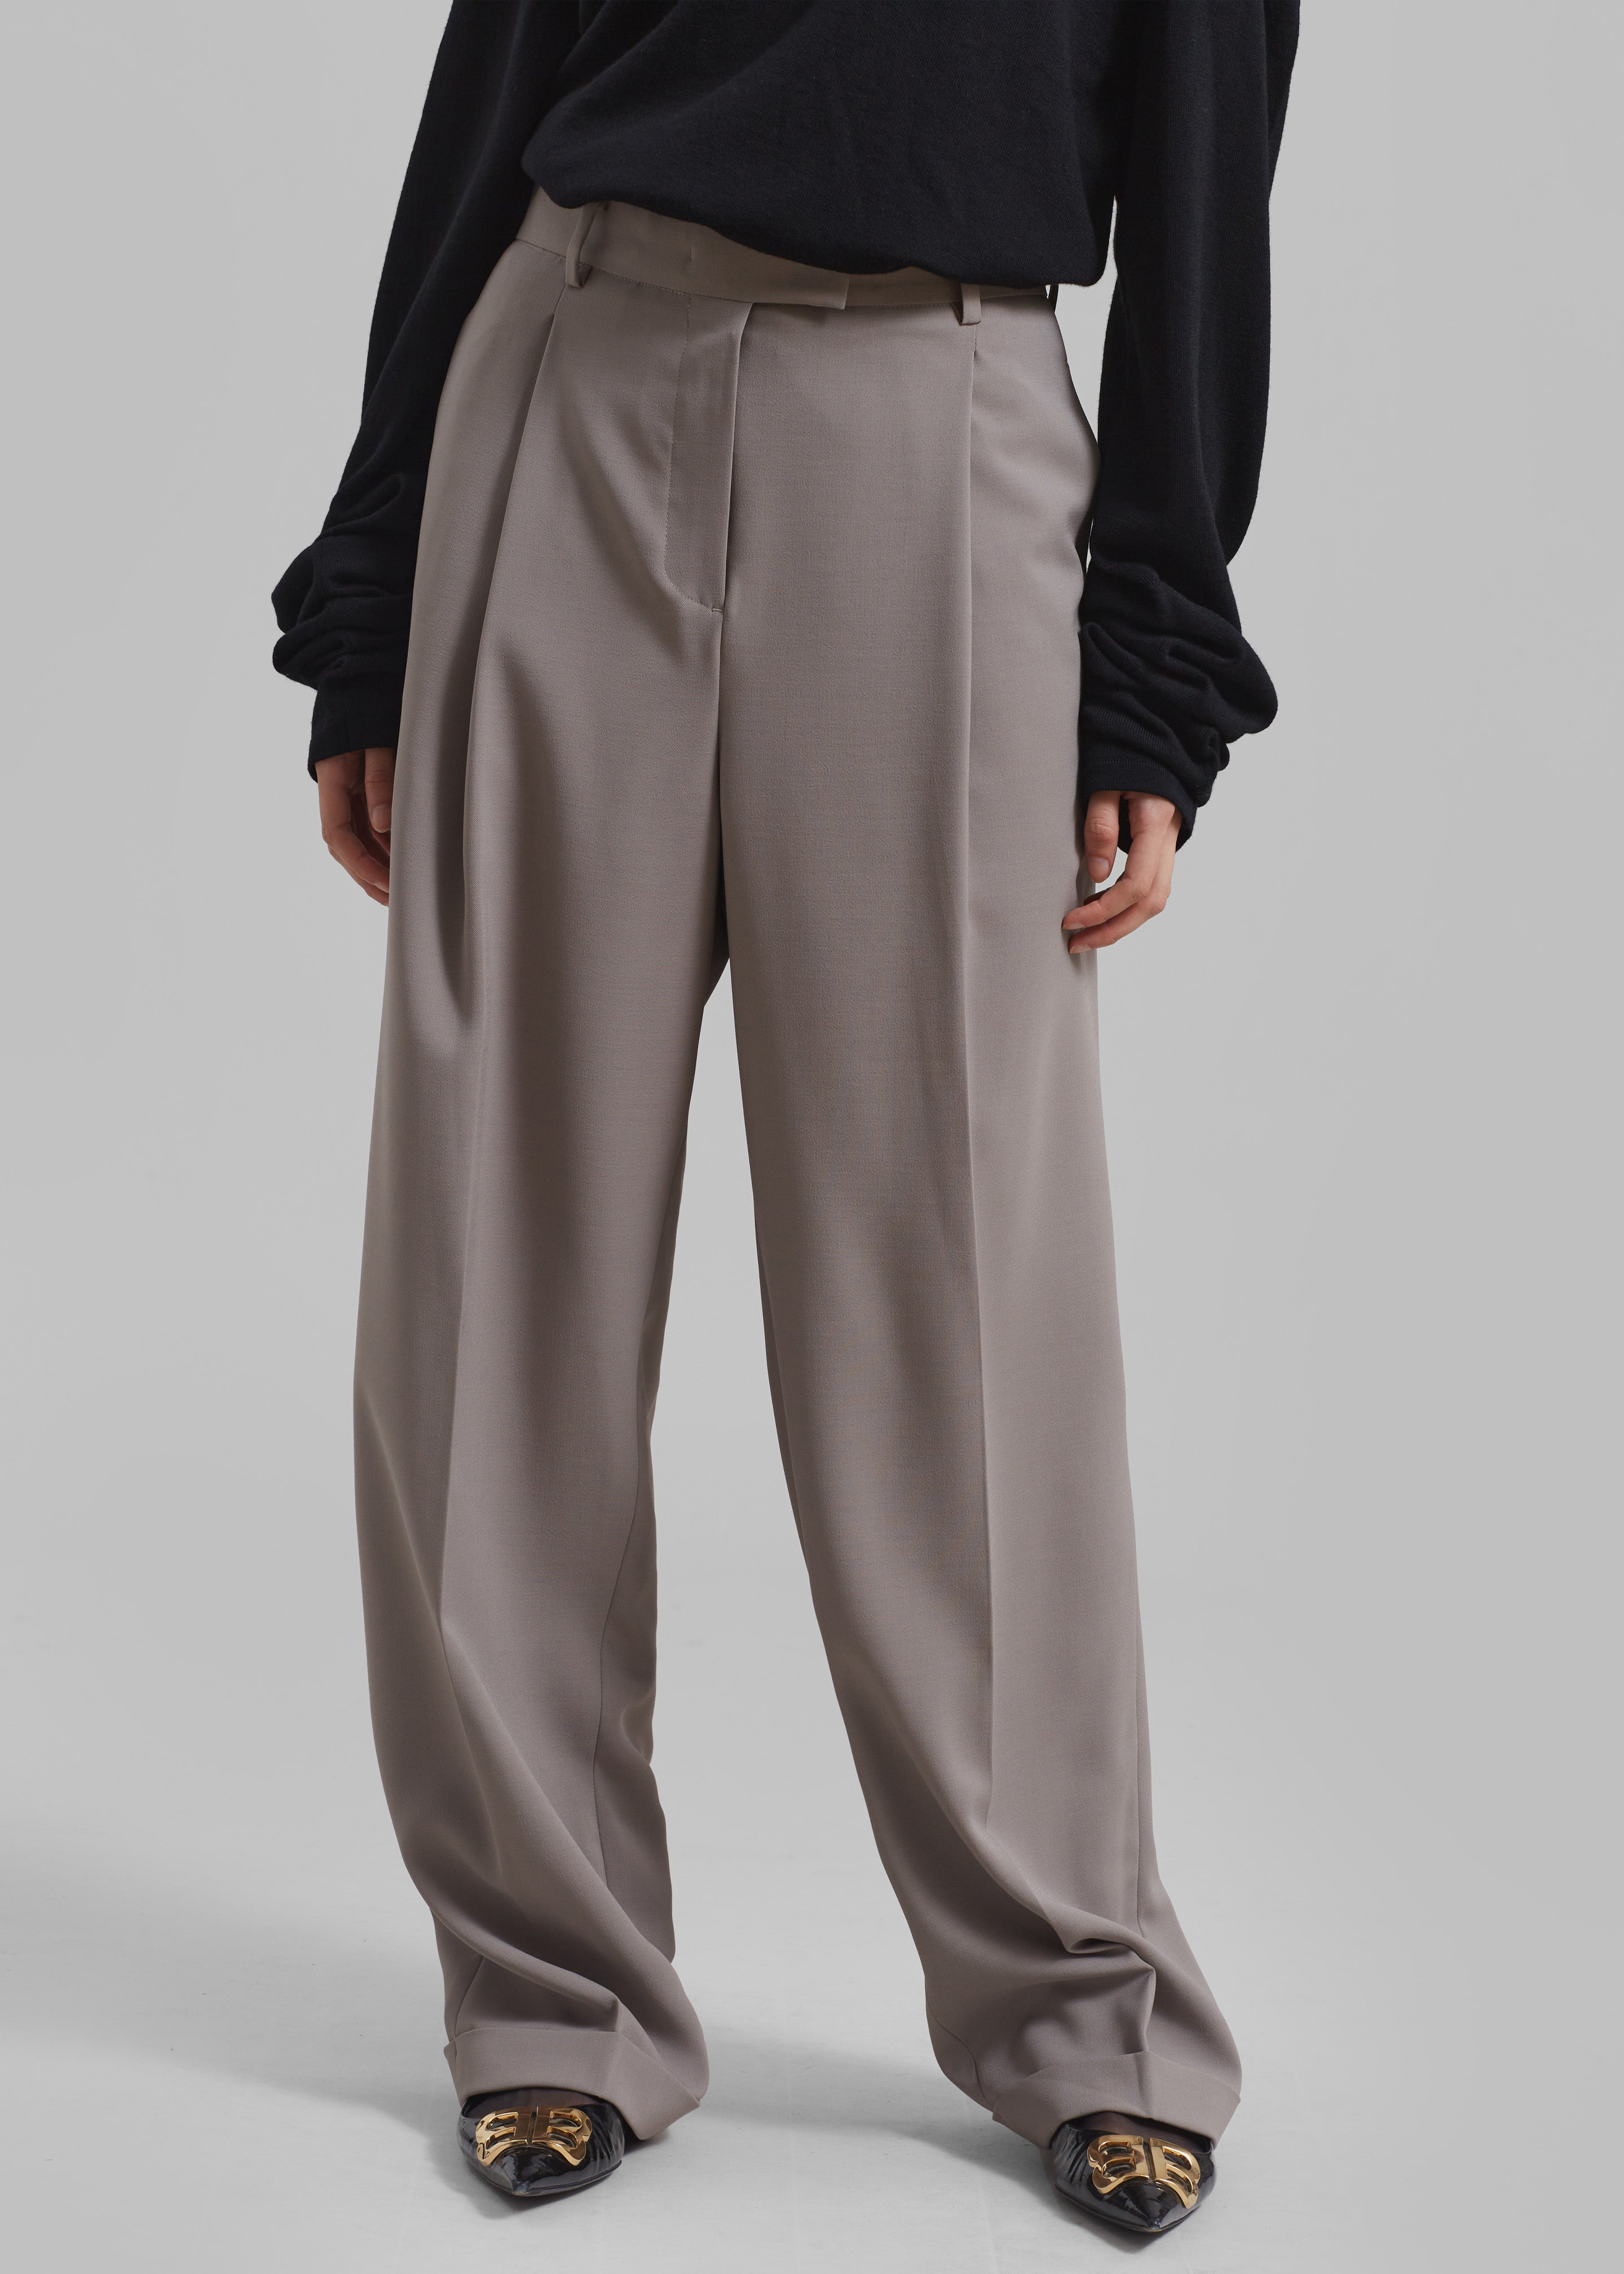 Quinnie Trousers - Grey - 4